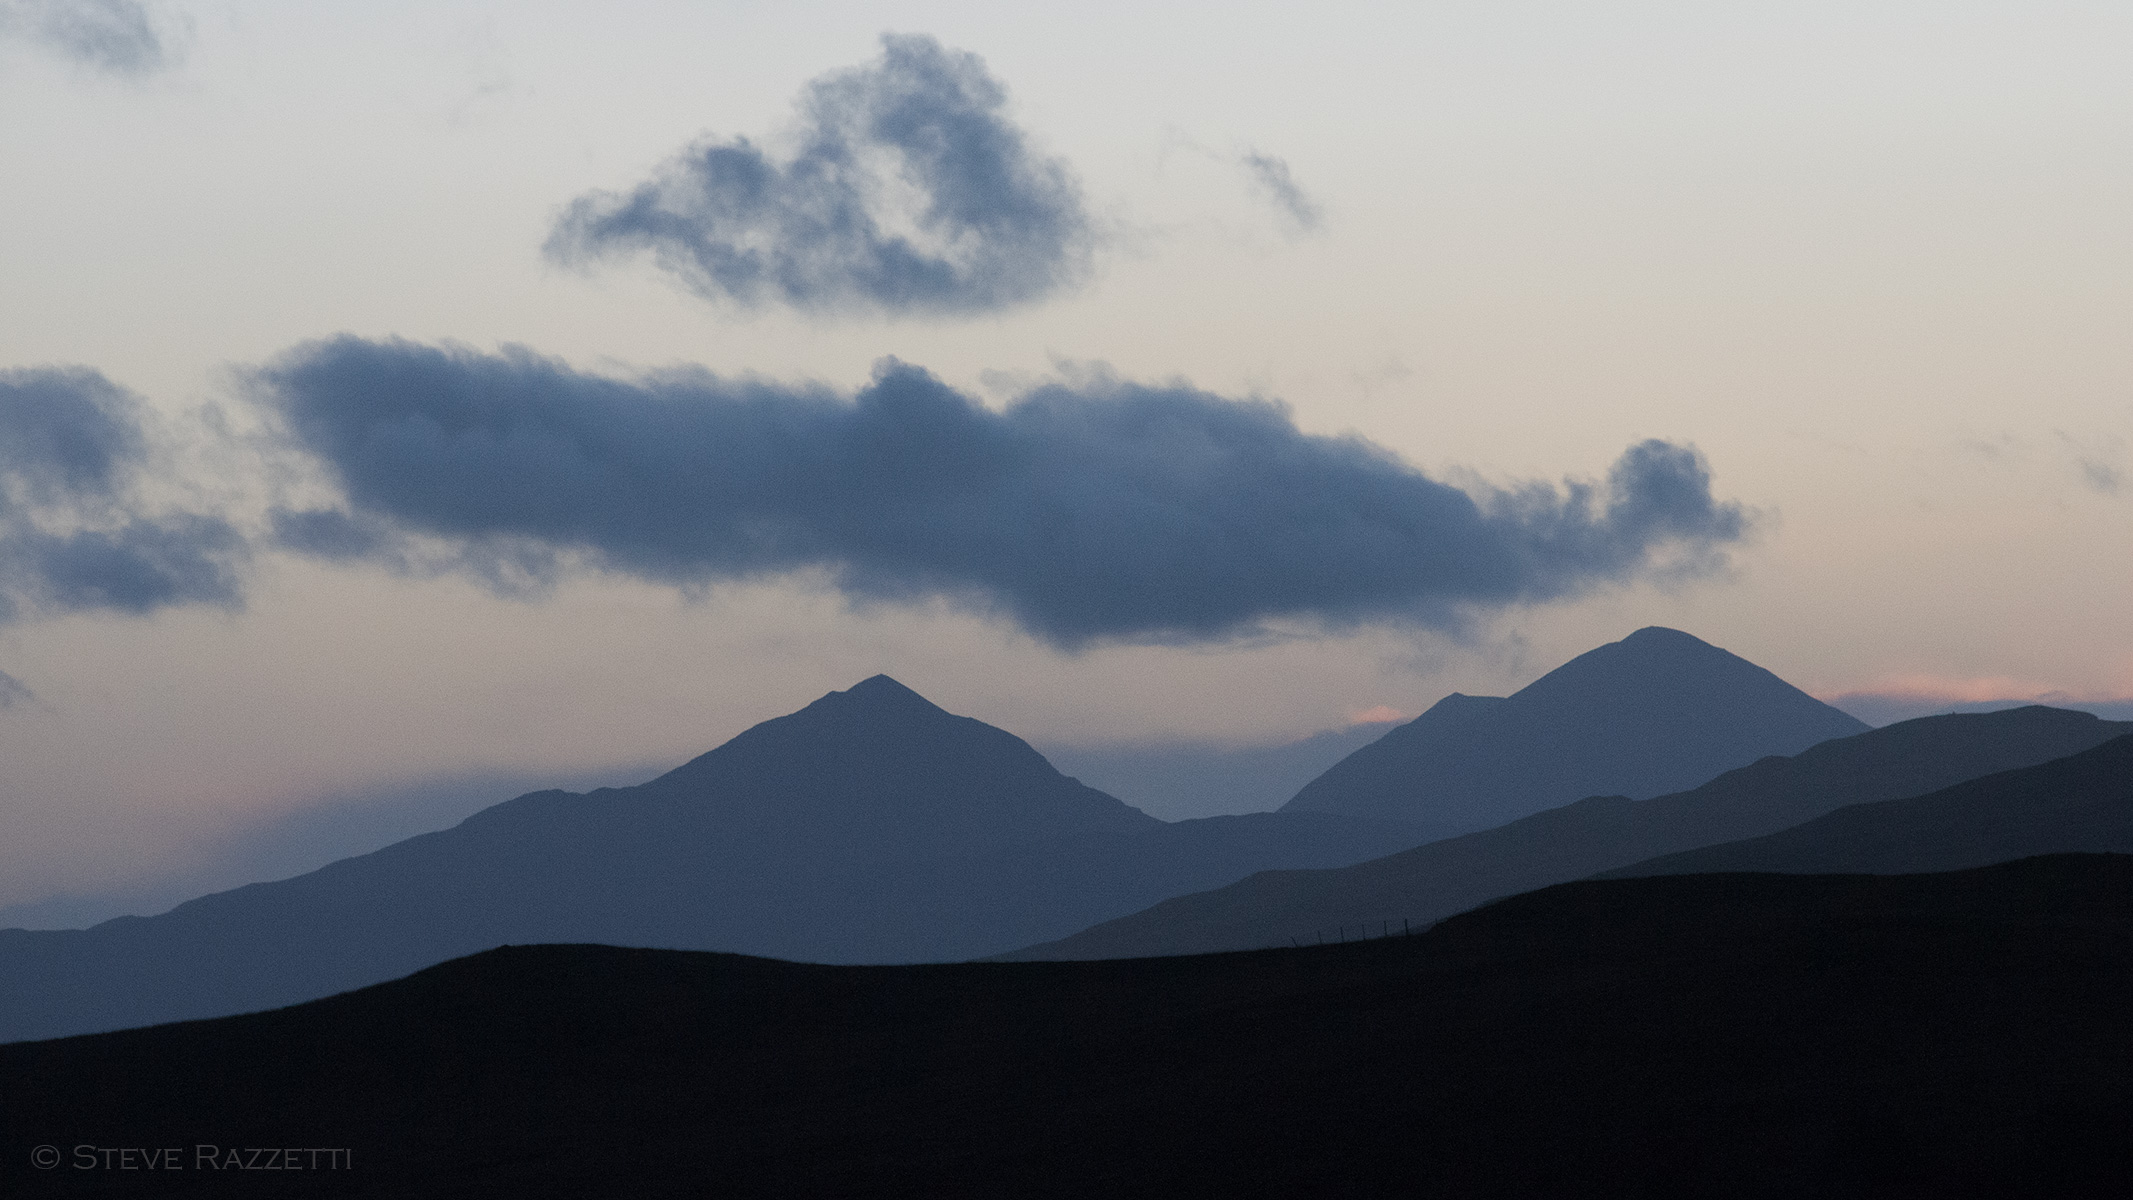 At dusk, from the track to Barnhill, where George Orwell wrote 1984 in the 1940's.Nikon D300, 60mm